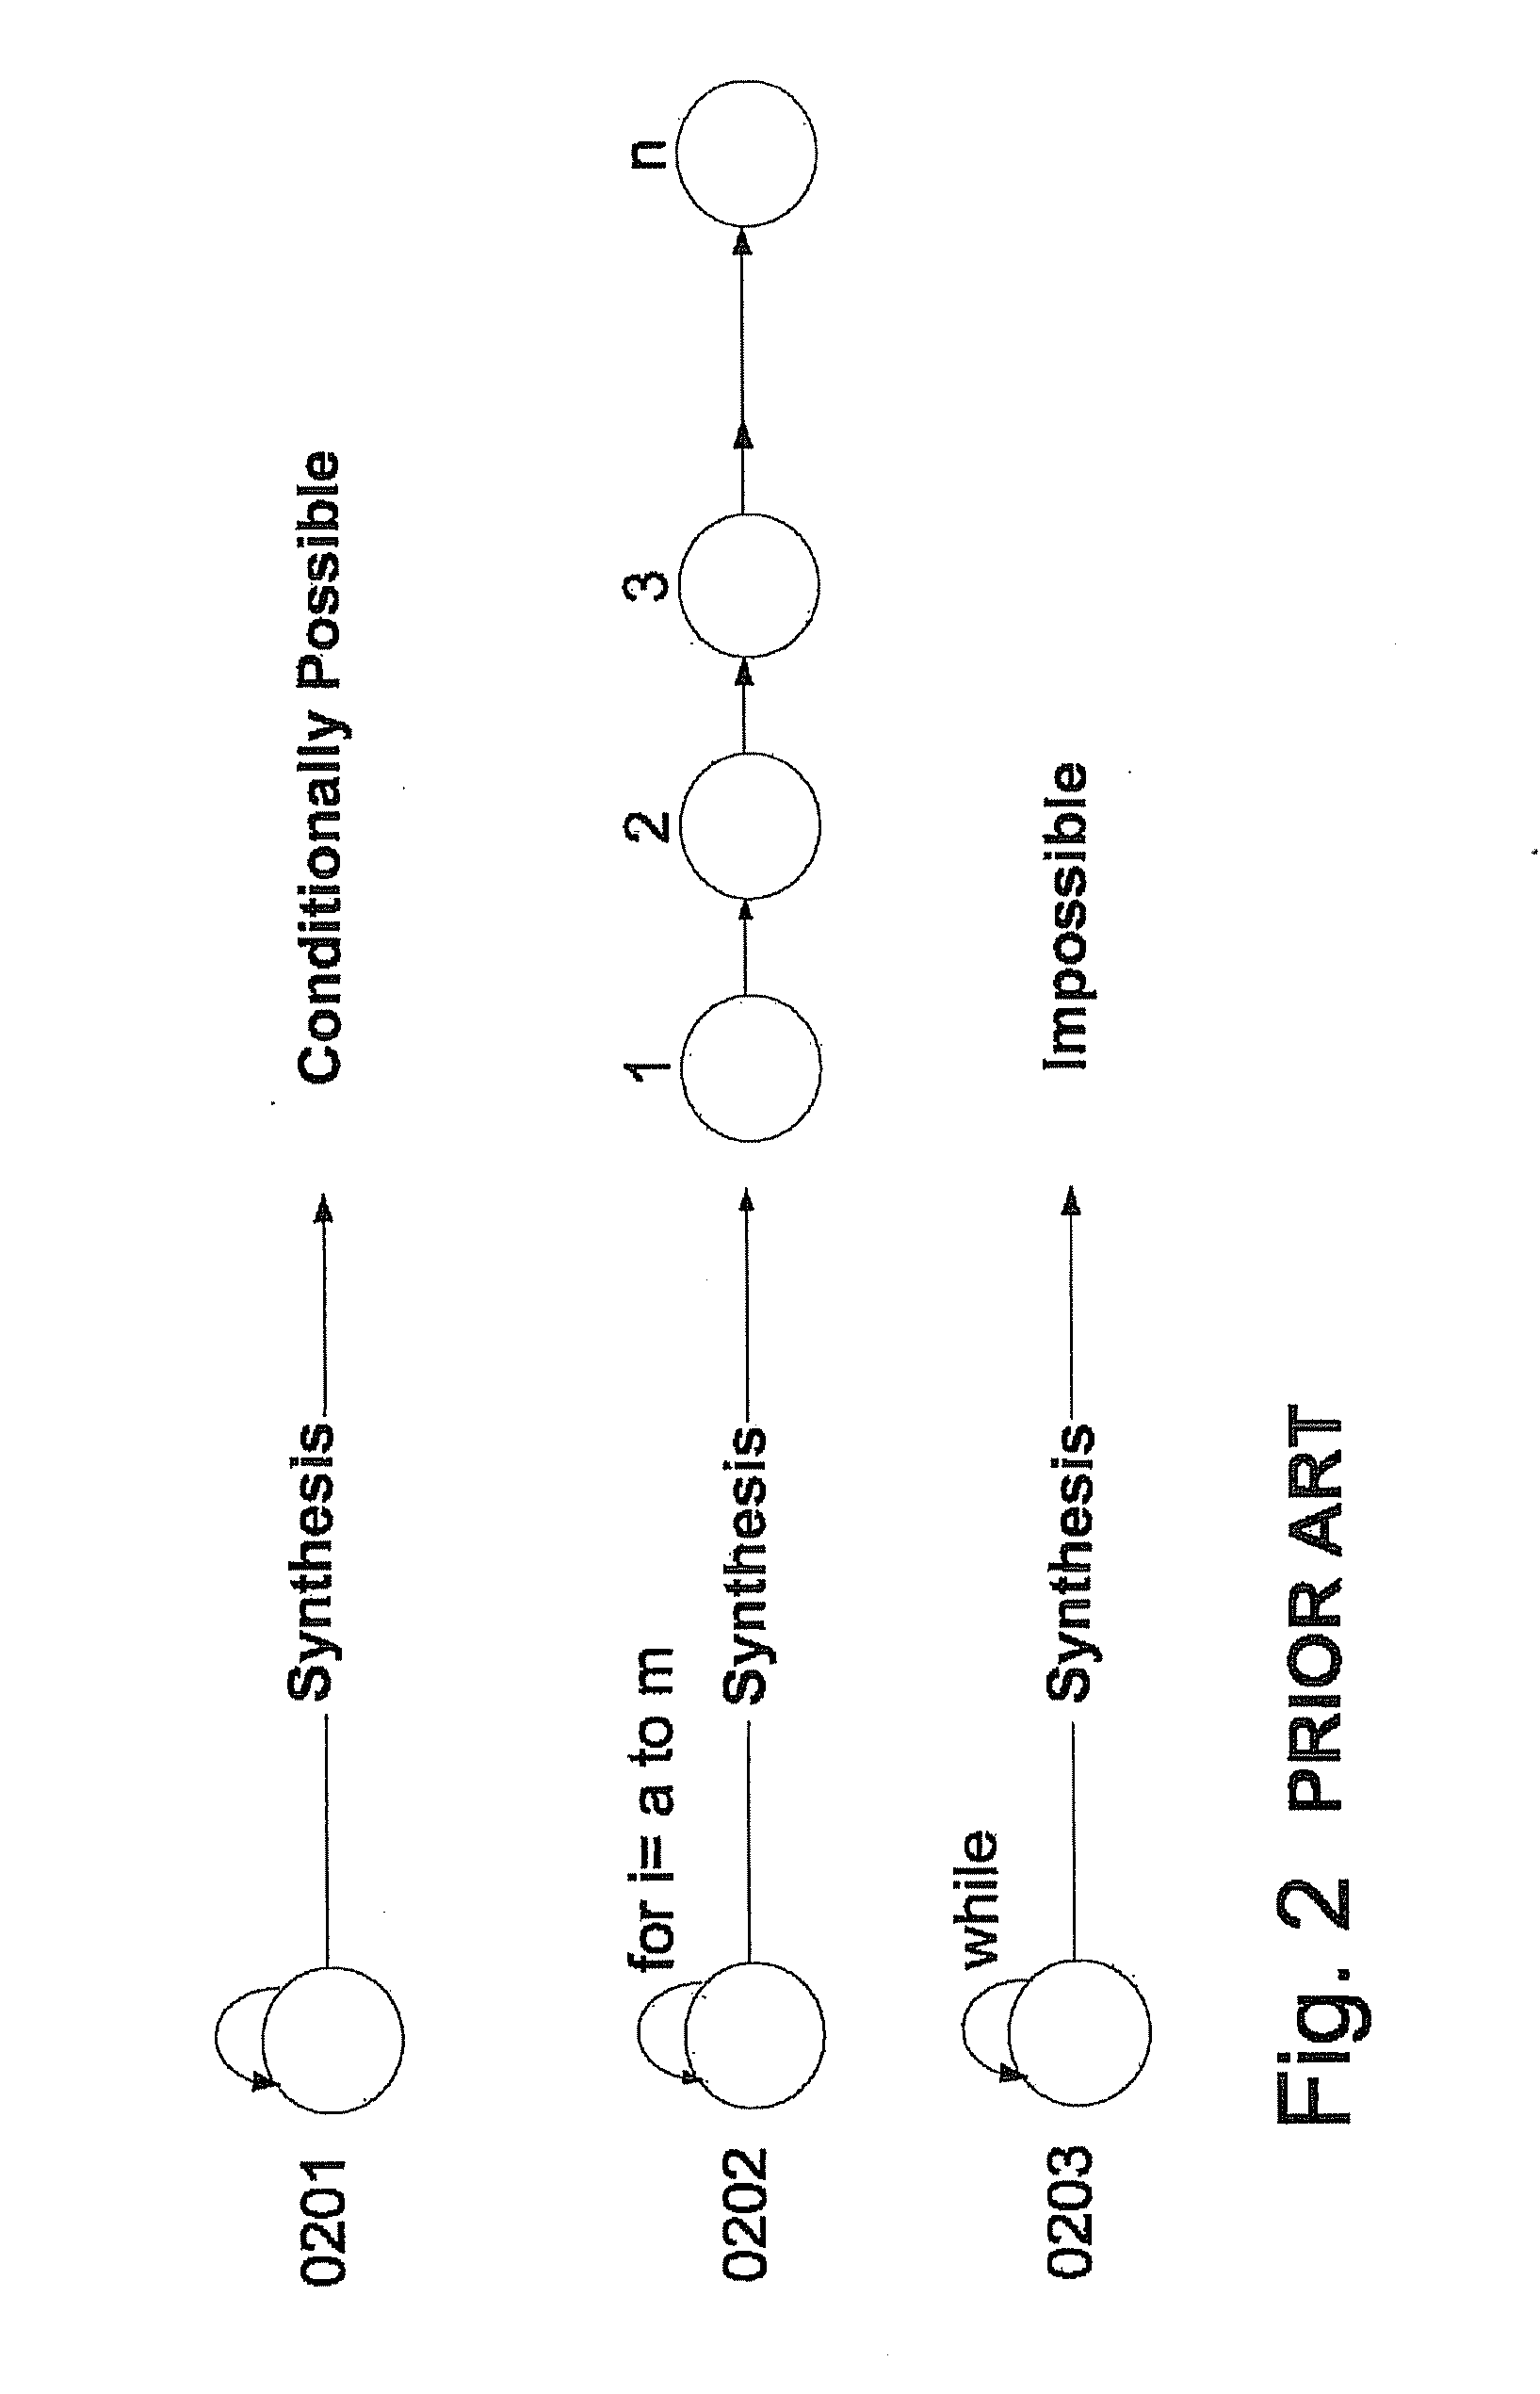 Configurable logic integrated circuit having a multidimensional structure of configurable elements